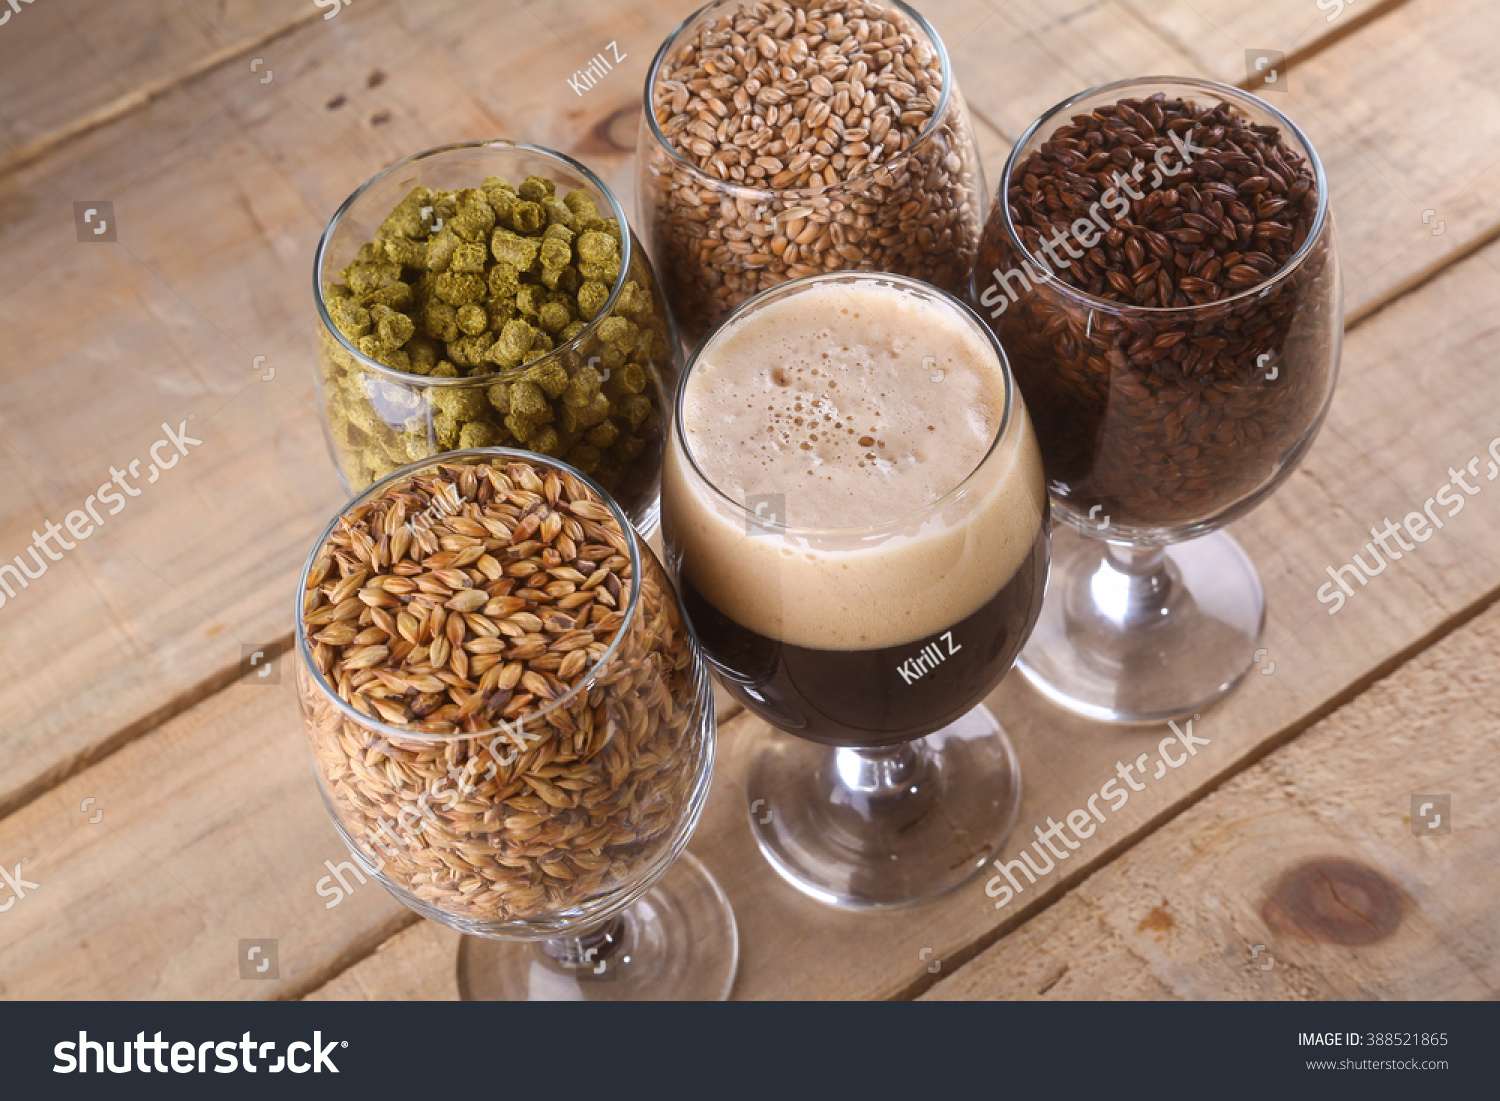 Glasses filled with dark beer, different malts and hops over a wooden background #388521865